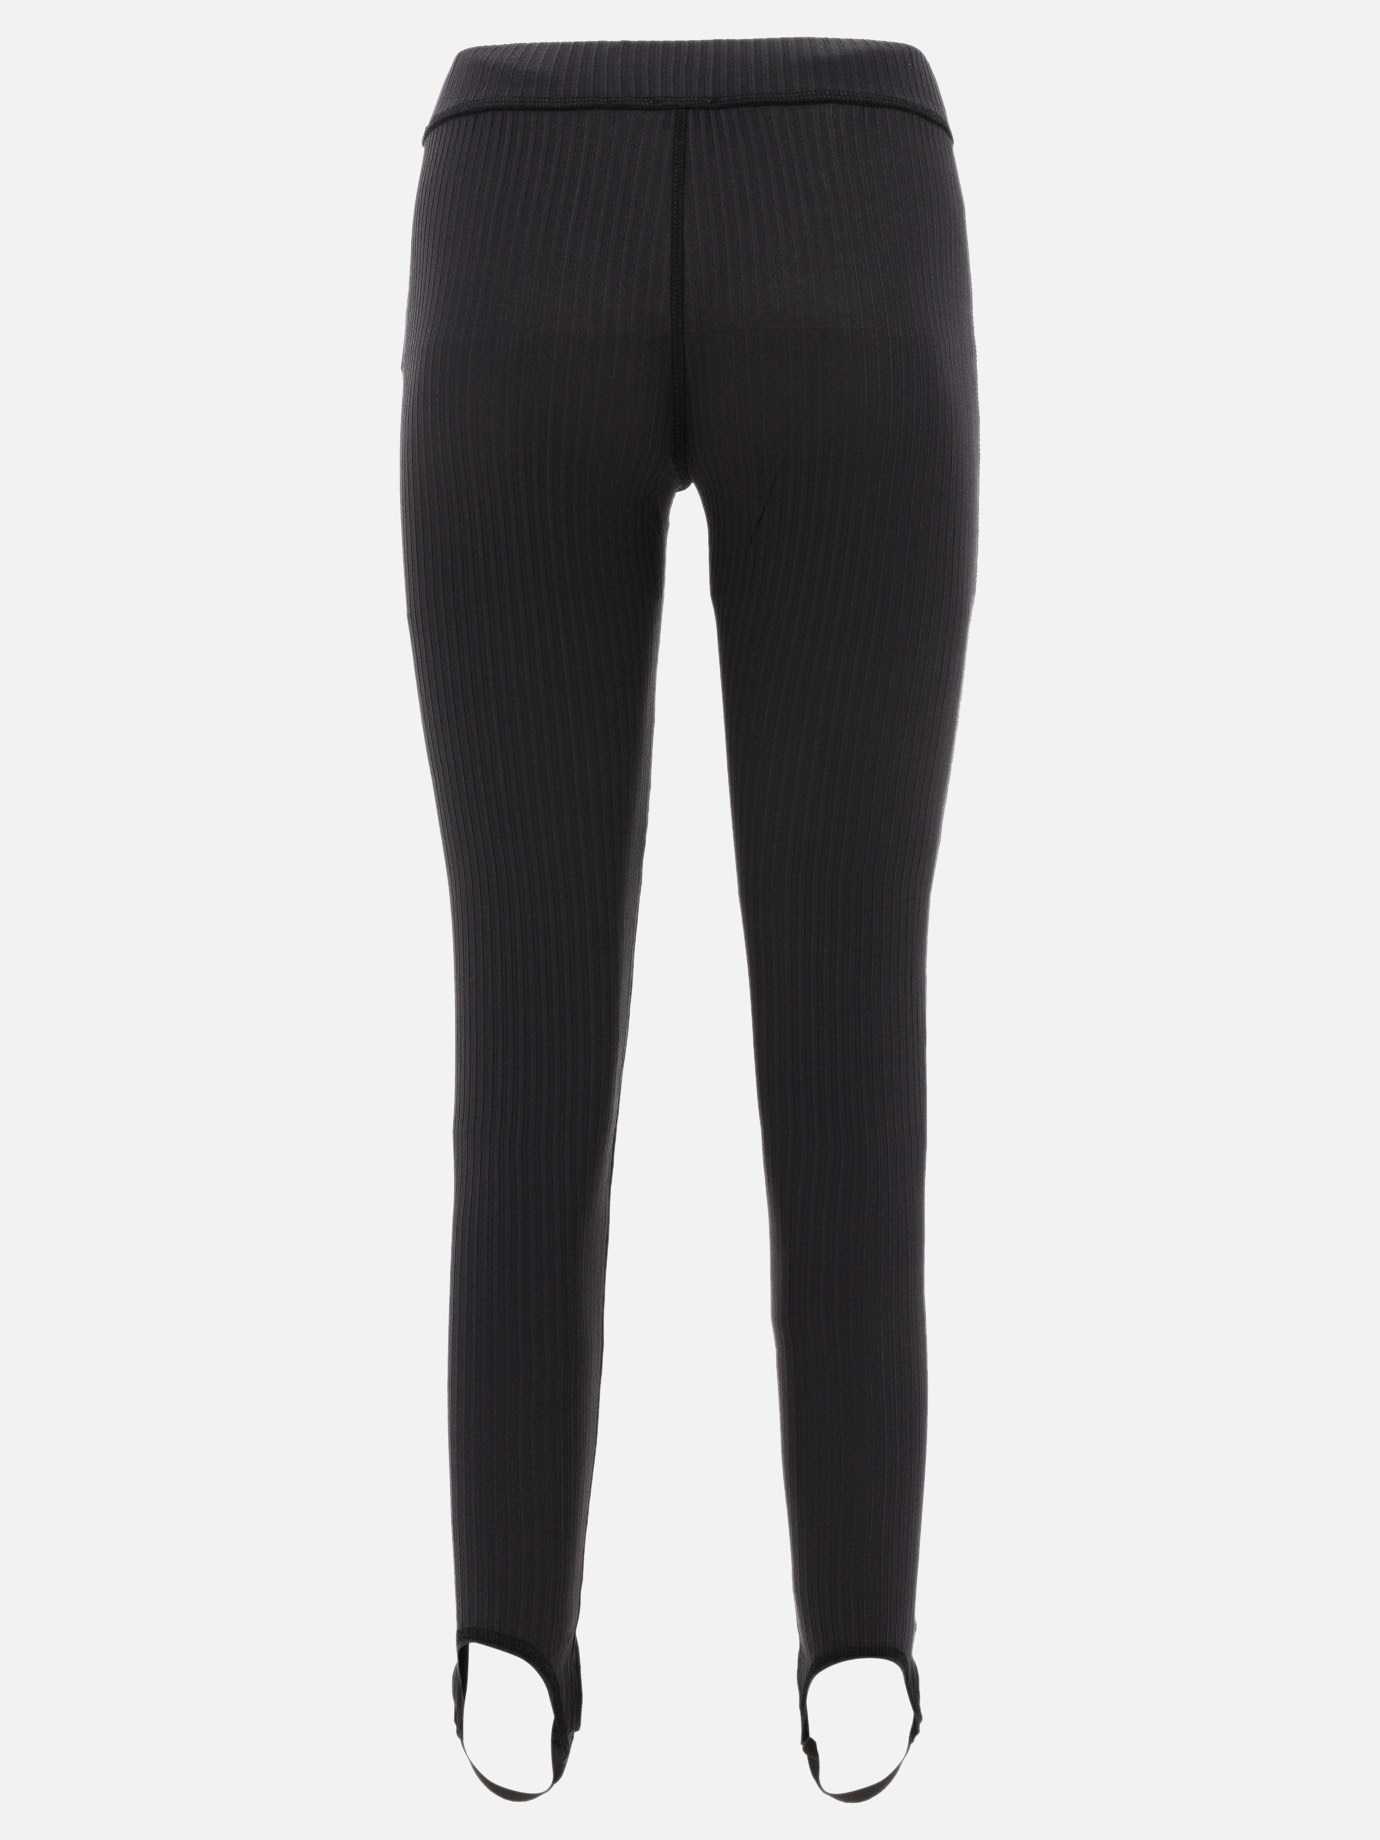 Ribbed leggings with stirrup by Ganni